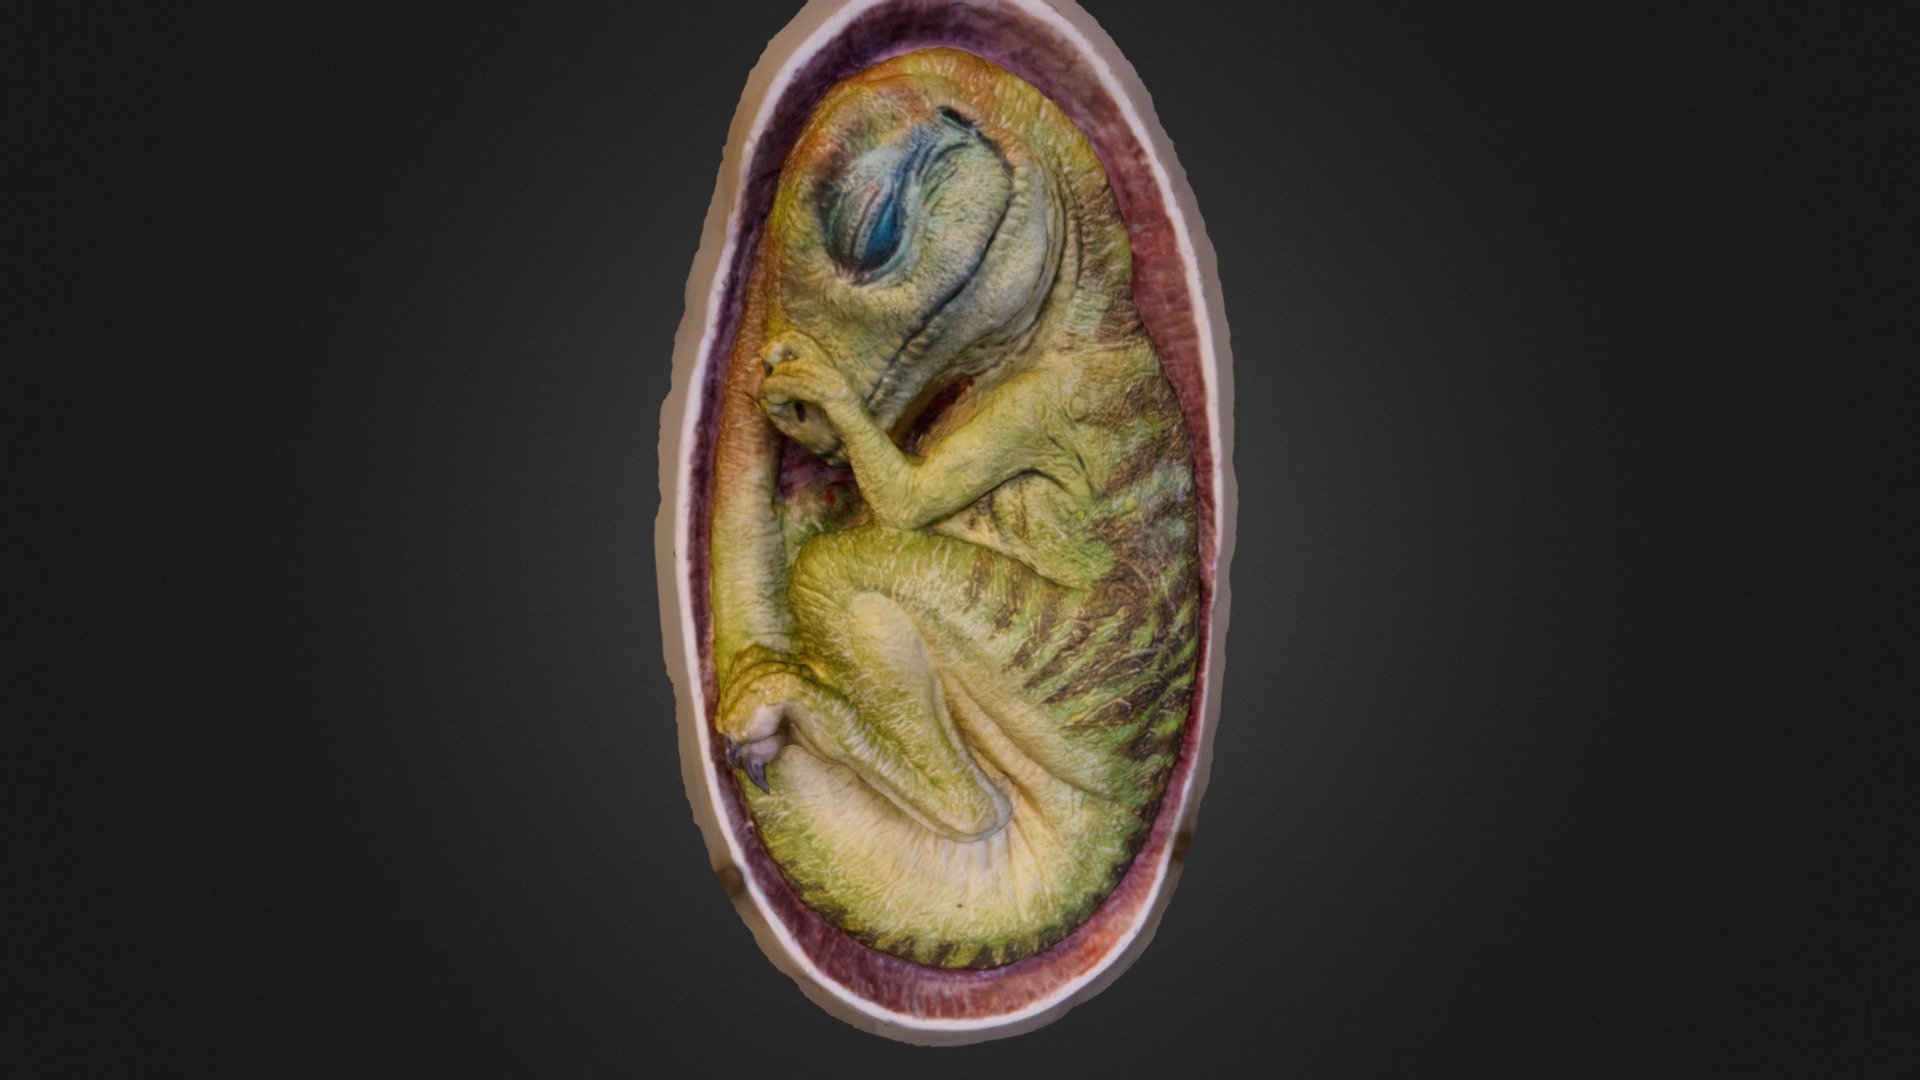 (Obviously) not a real one. Reconstruction by Michel Fontaine.
Museum National d'Histoire Naturelle, Paris, France.

3D scanned using Agisoft Photoscan 3d model